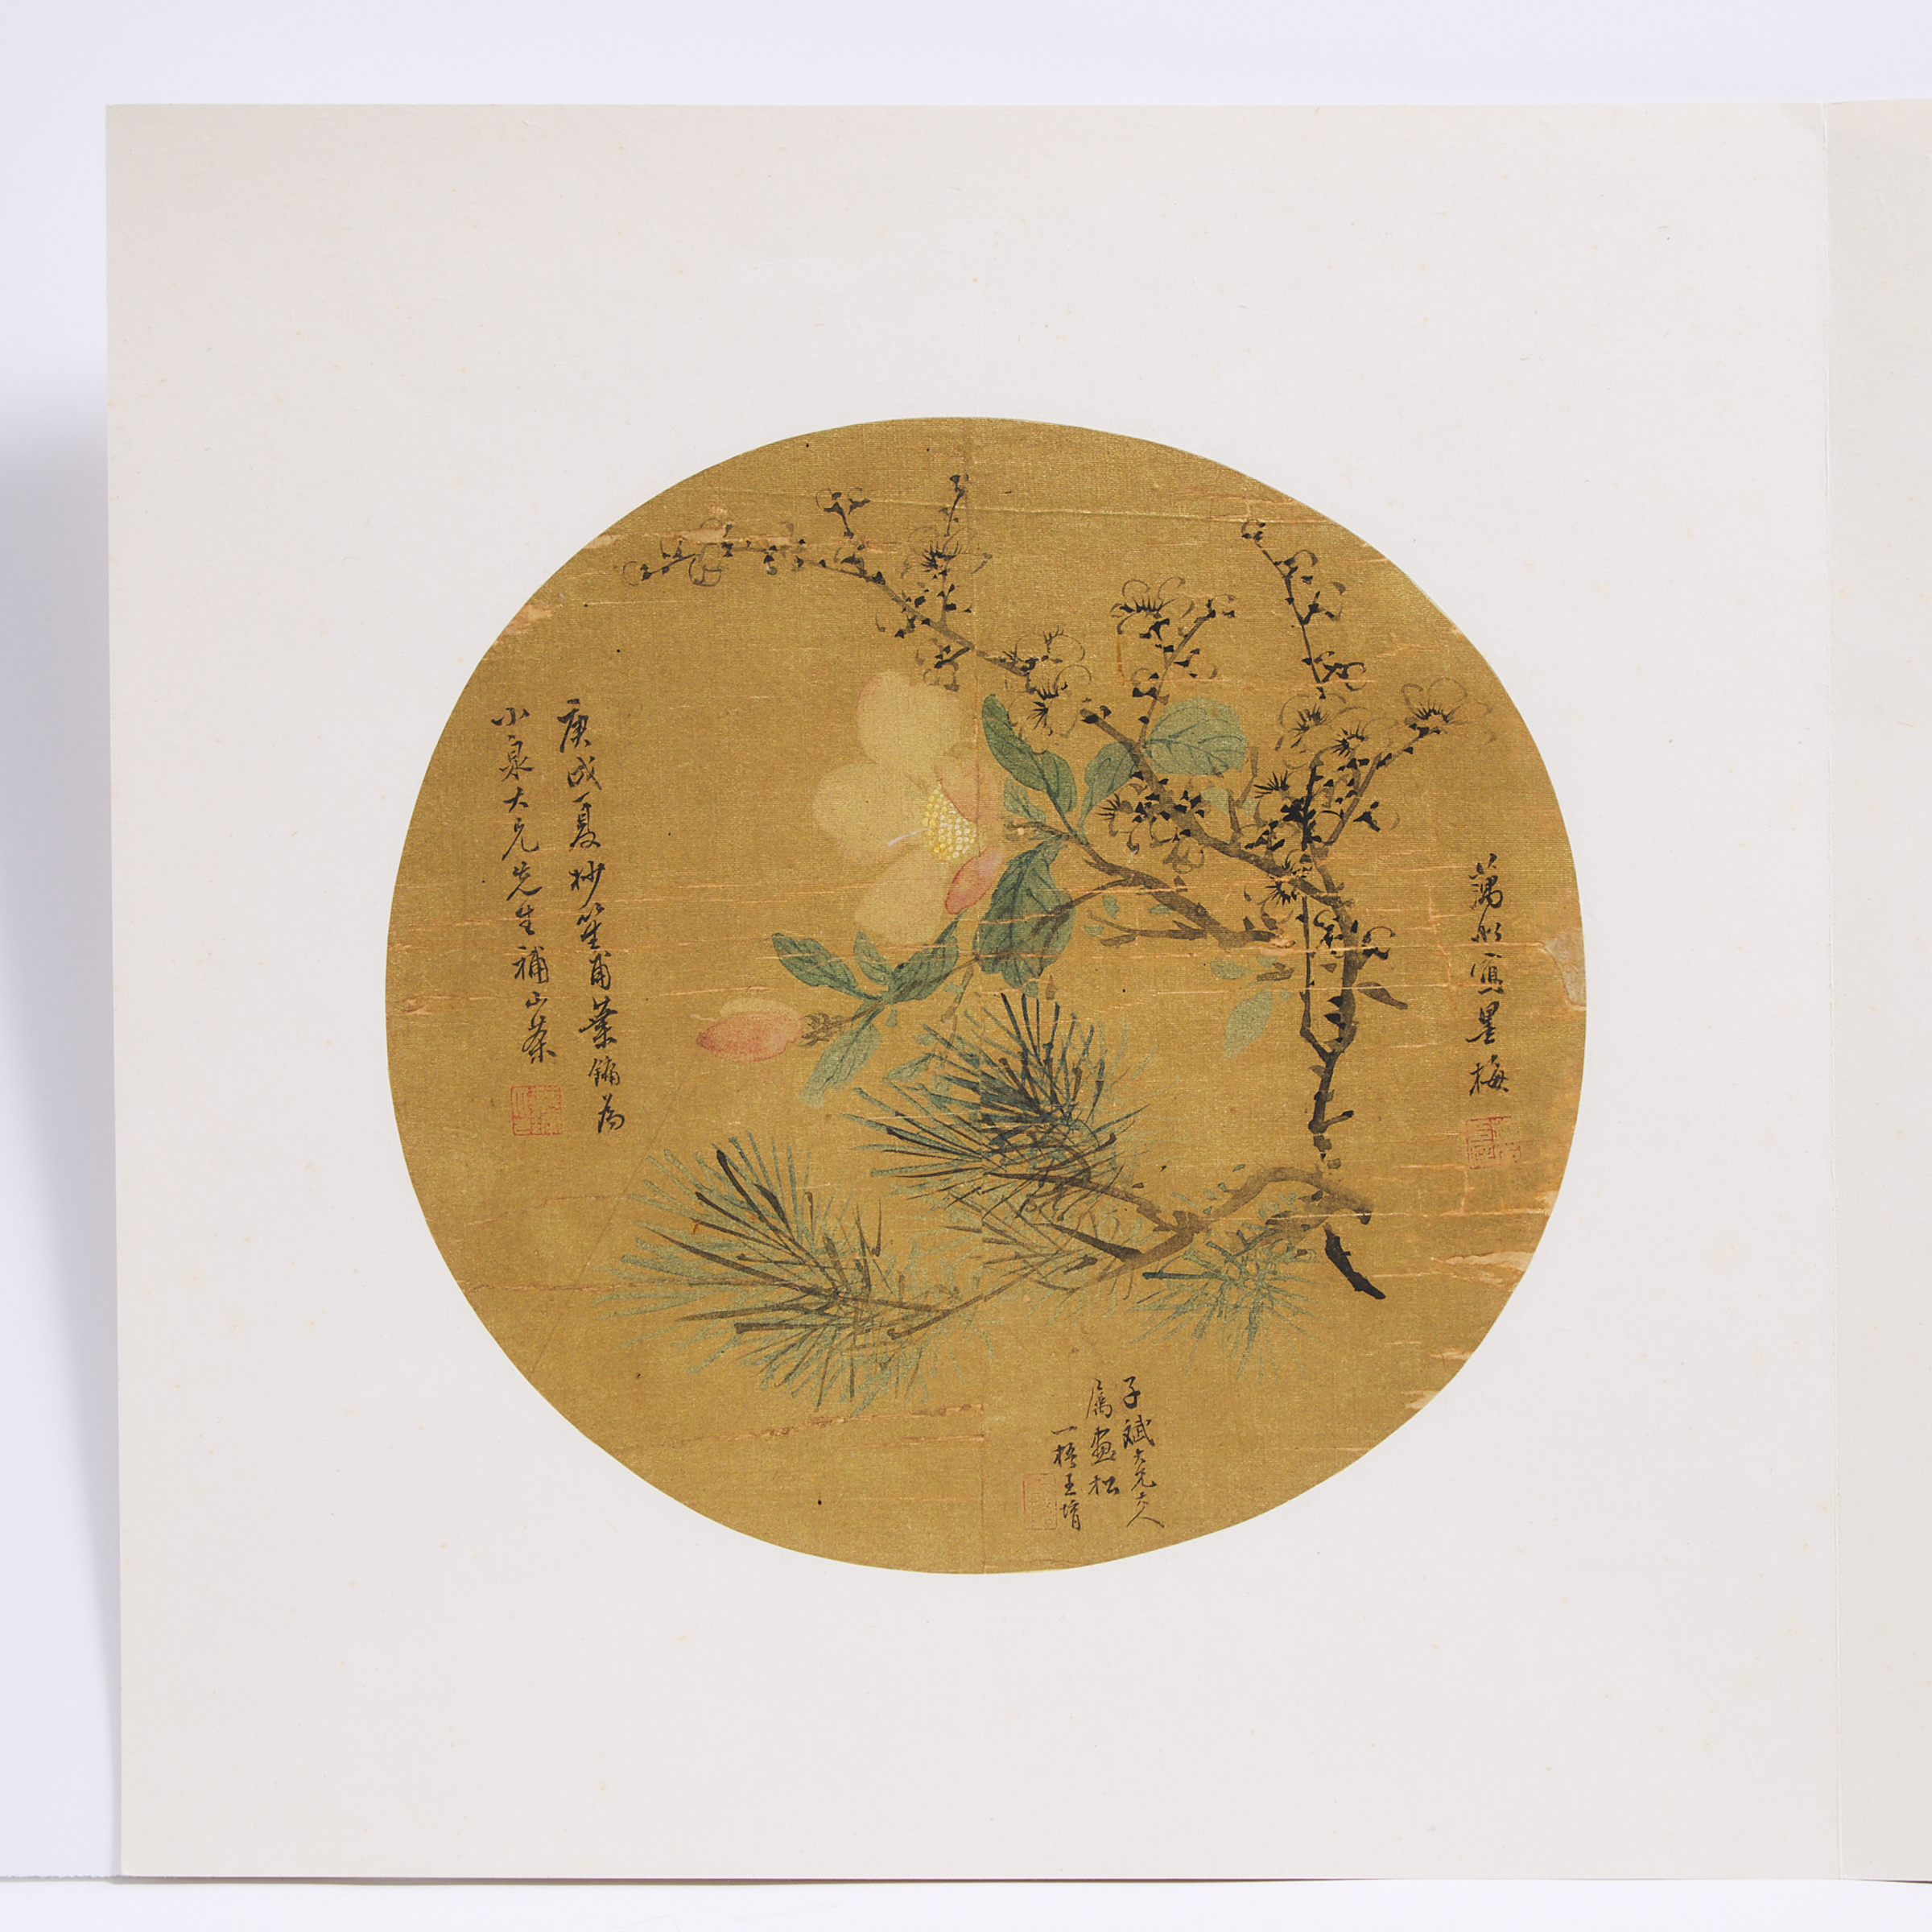 Shen Zhenming, Ye Yong, and Wang Yu, 
A Painting of Bamboo, Plum Blossom, and Camillia, Daoguang Period (1821-1850)